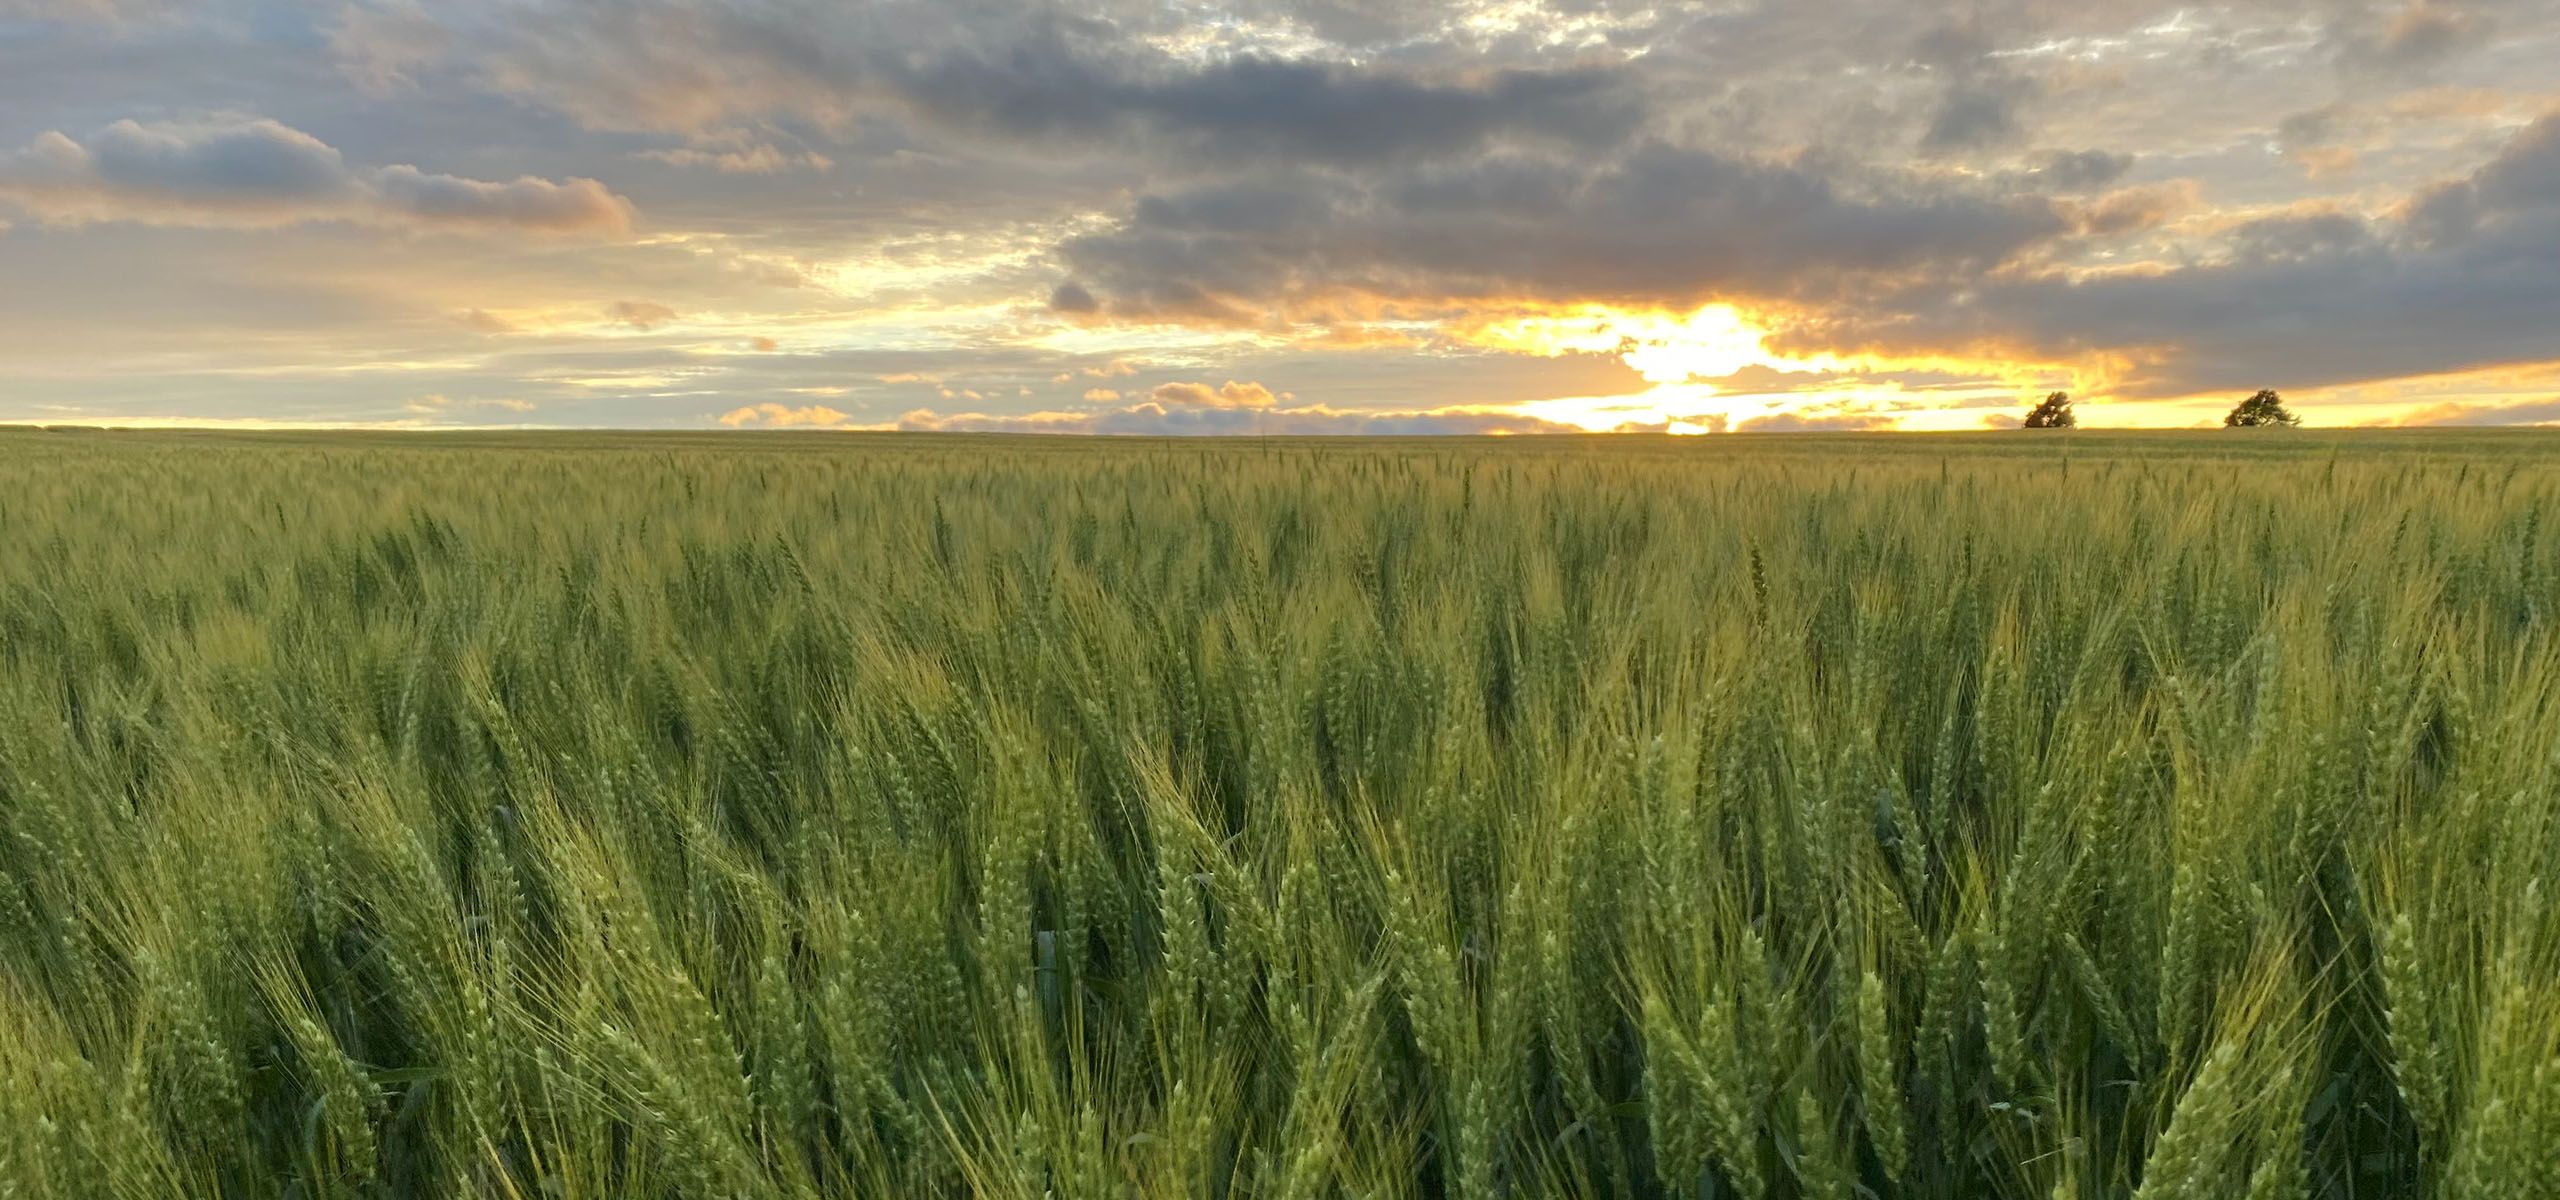 Alliance Agri-Turf Agricultural News photo of crop and sunset